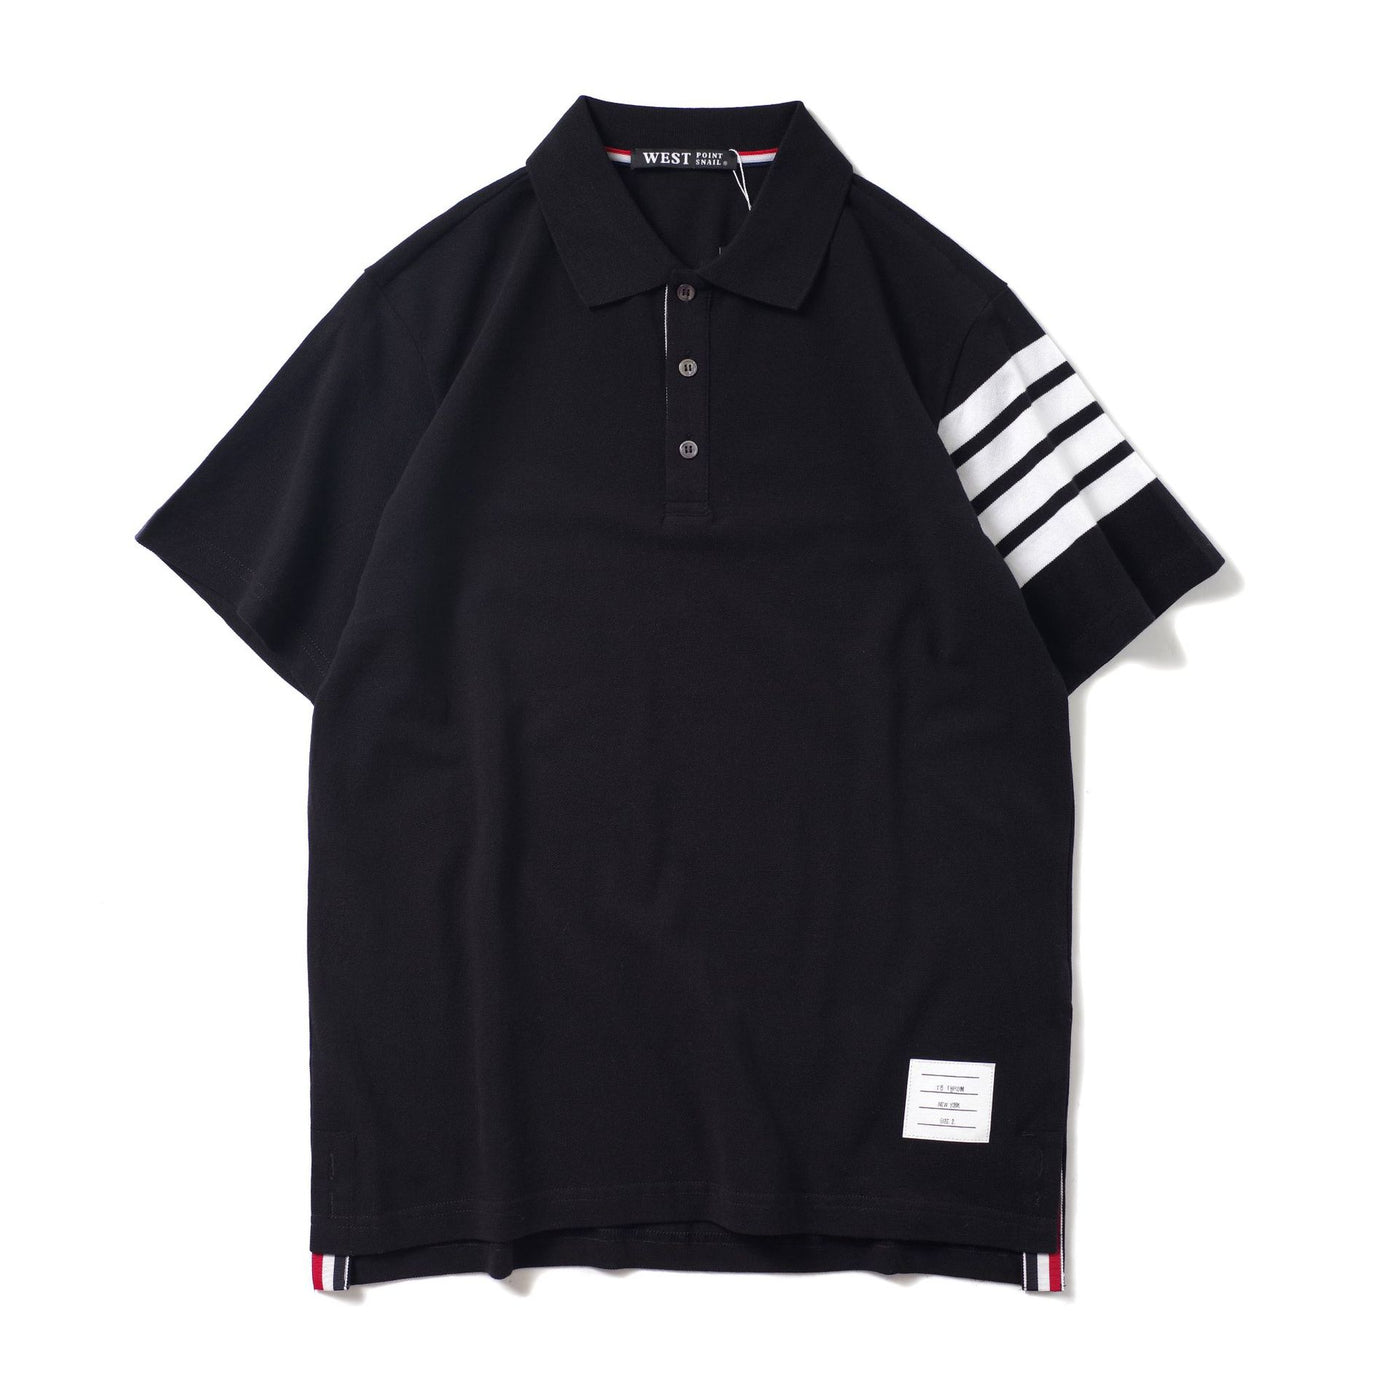 Four Bars Solid Color Polo